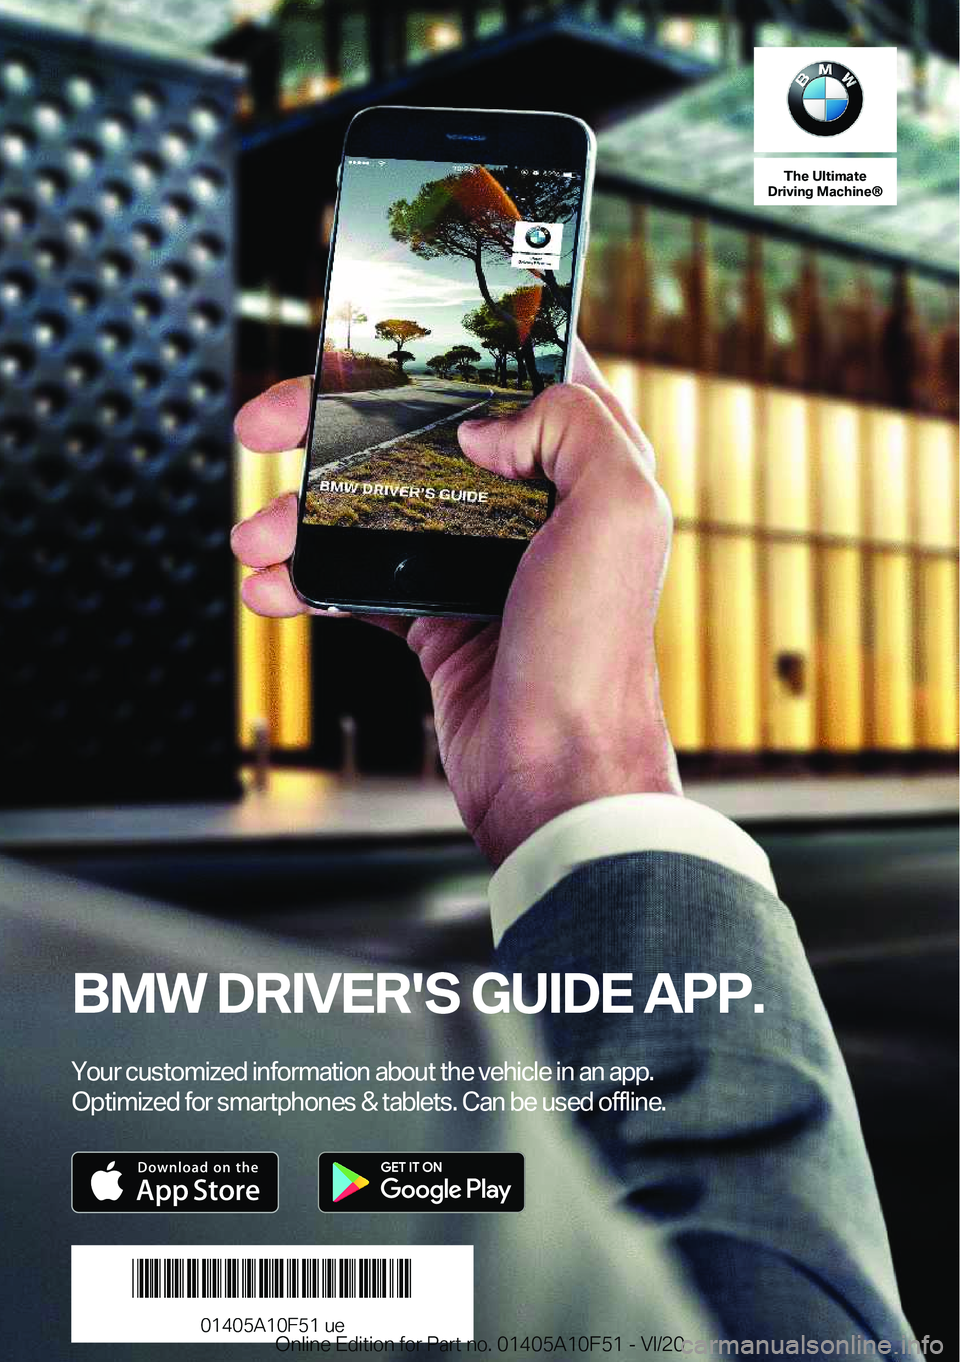 BMW X4 2021  Owners Manual �T�h�e��U�l�t�i�m�a�t�e
�D�r�i�v�i�n�g��M�a�c�h�i�n�e�n
�B�M�W��D�R�I�V�E�R�'�S��G�U�I�D�E��A�P�P�.
�Y�o�u�r��c�u�s�t�o�m�i�z�e�d��i�n�f�o�r�m�a�t�i�o�n��a�b�o�u�t��t�h�e��v�e�h�i�c�l�e�